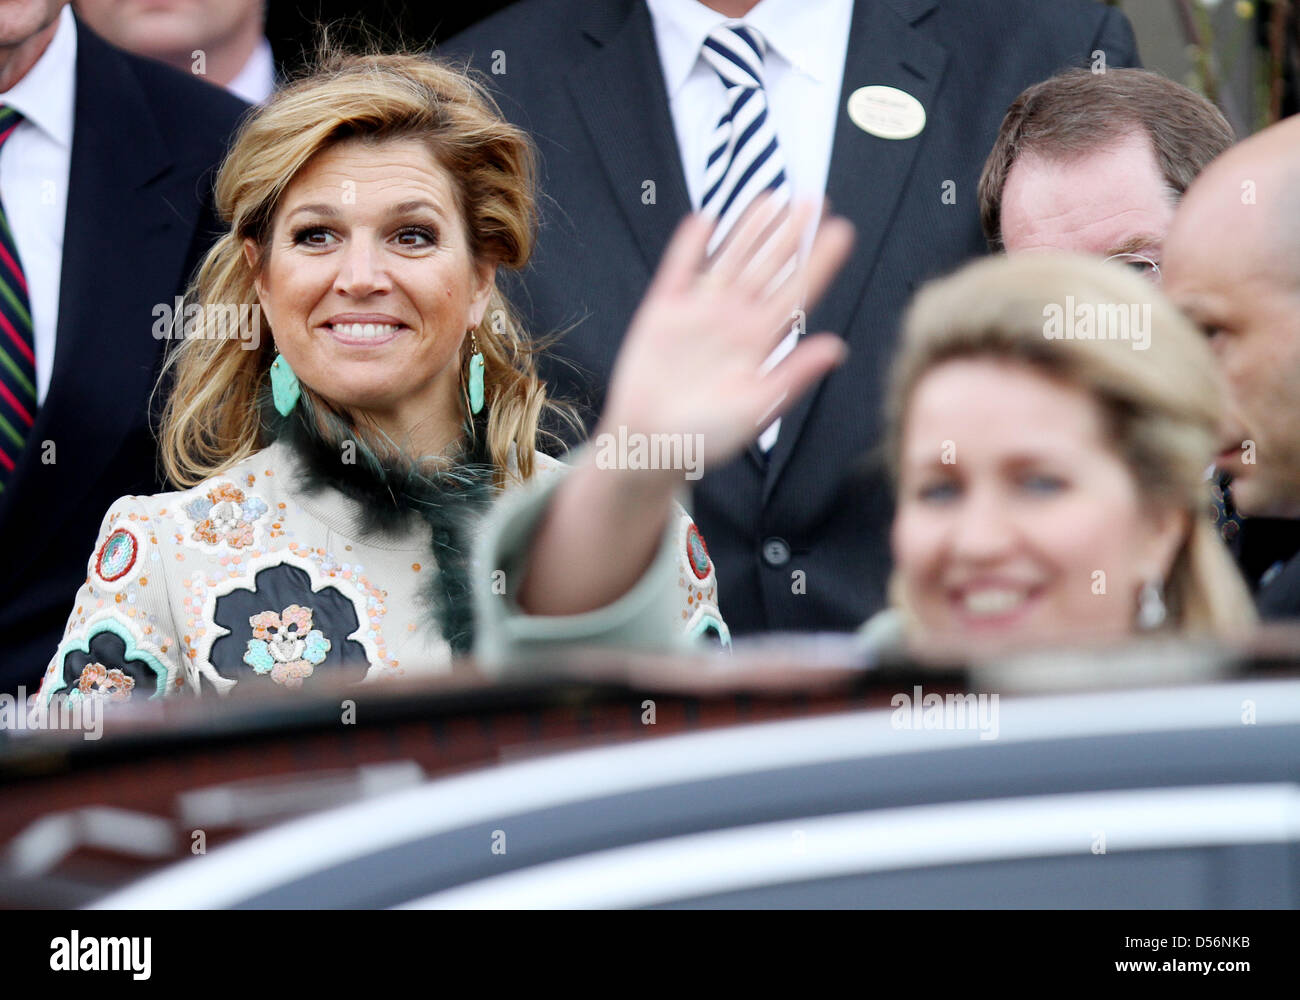 Princess Maxima of the Netherlands (L) and Russian First Lady Svetlana Medvedeva (front) attend the season opening of the International flower exhibition 'De Keukenhof' in Lisse, Netherlands, 17 March 2010. The theme of this year's exhibition is 'From Russia with Love'. Photo: Patrick van Katwijk Stock Photo